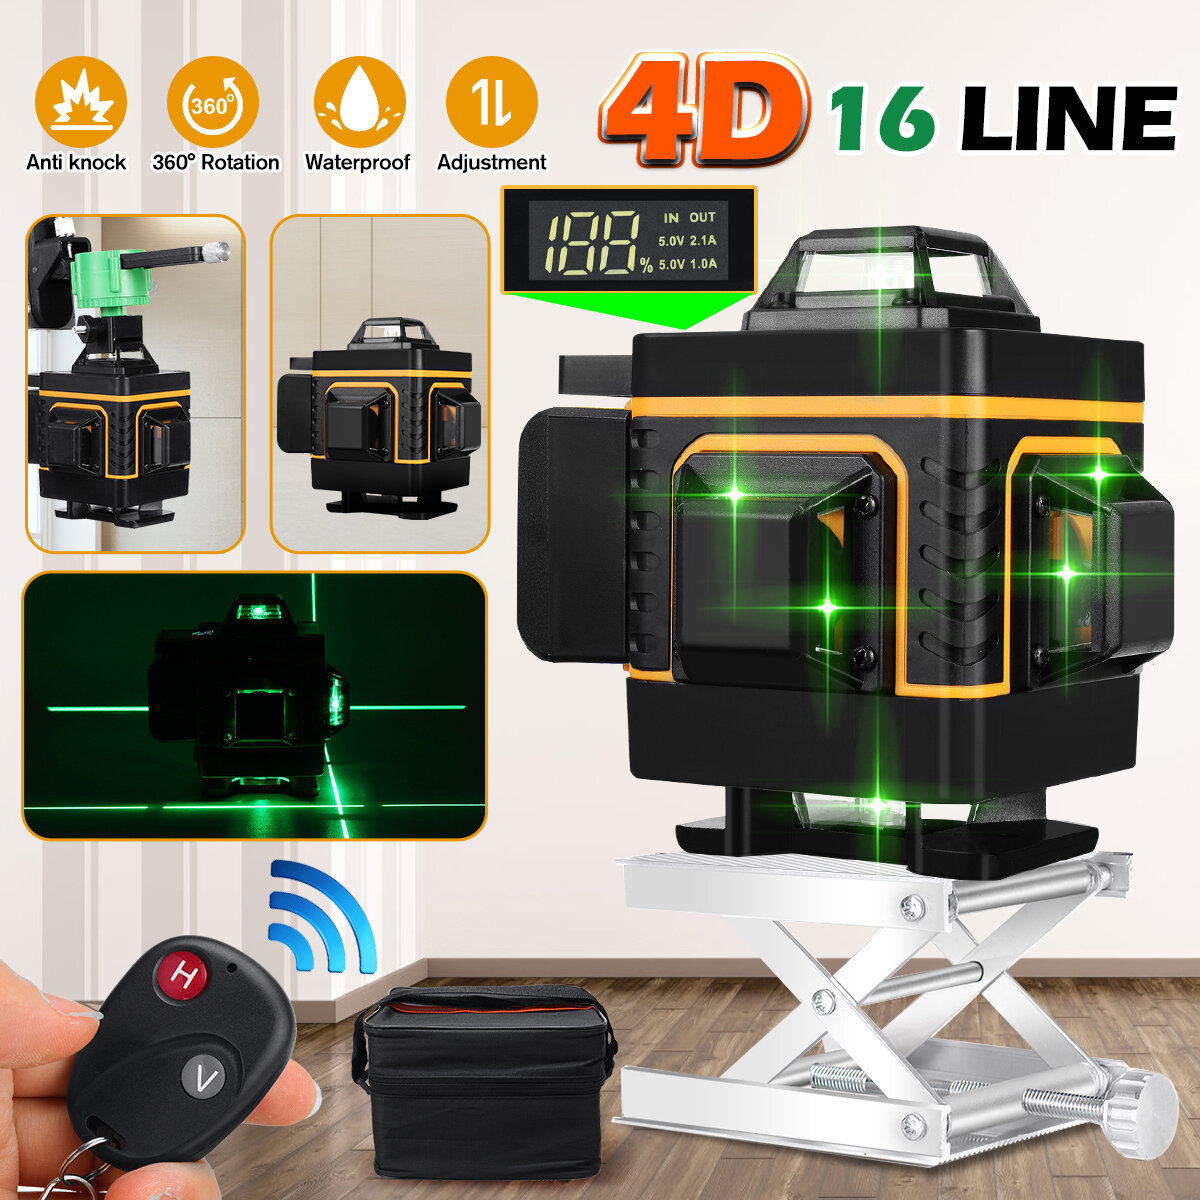 

FASGet 16 Lines 4D 360° Laser Level Self Leveling Line Holder Tool Bracket with Single Battery App Control Remote Contro